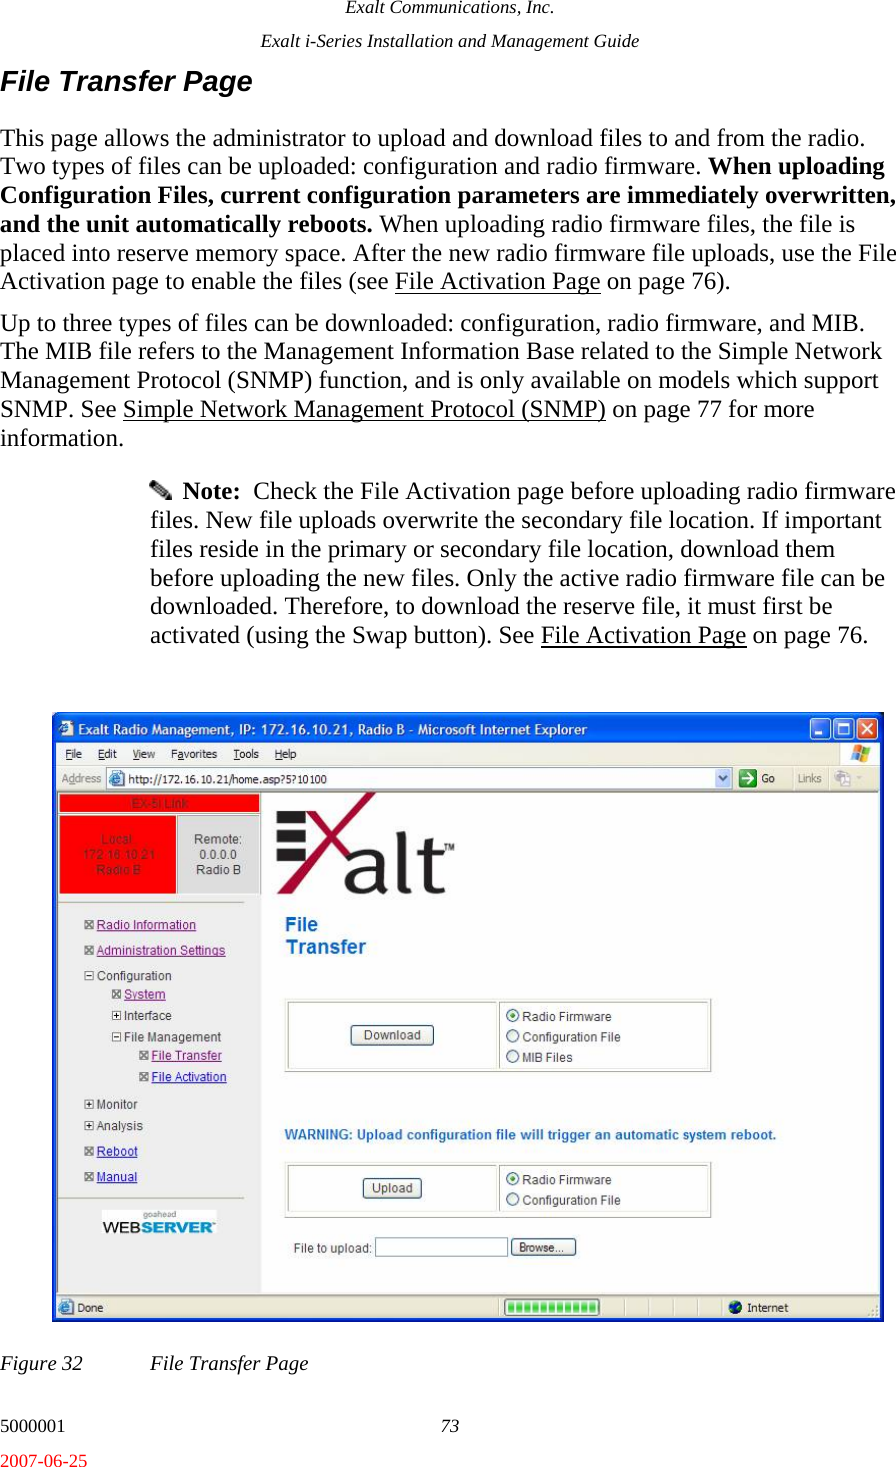 Exalt Communications, Inc. Exalt i-Series Installation and Management Guide 5000001  73 2007-06-25 File Transfer Page This page allows the administrator to upload and download files to and from the radio. Two types of files can be uploaded: configuration and radio firmware. When uploading Configuration Files, current configuration parameters are immediately overwritten, and the unit automatically reboots. When uploading radio firmware files, the file is placed into reserve memory space. After the new radio firmware file uploads, use the File Activation page to enable the files (see File Activation Page on page 76).  Up to three types of files can be downloaded: configuration, radio firmware, and MIB. The MIB file refers to the Management Information Base related to the Simple Network Management Protocol (SNMP) function, and is only available on models which support SNMP. See Simple Network Management Protocol (SNMP) on page 77 for more information.   Note:  Check the File Activation page before uploading radio firmware files. New file uploads overwrite the secondary file location. If important files reside in the primary or secondary file location, download them before uploading the new files. Only the active radio firmware file can be downloaded. Therefore, to download the reserve file, it must first be activated (using the Swap button). See File Activation Page on page 76. Figure 32  File Transfer Page 